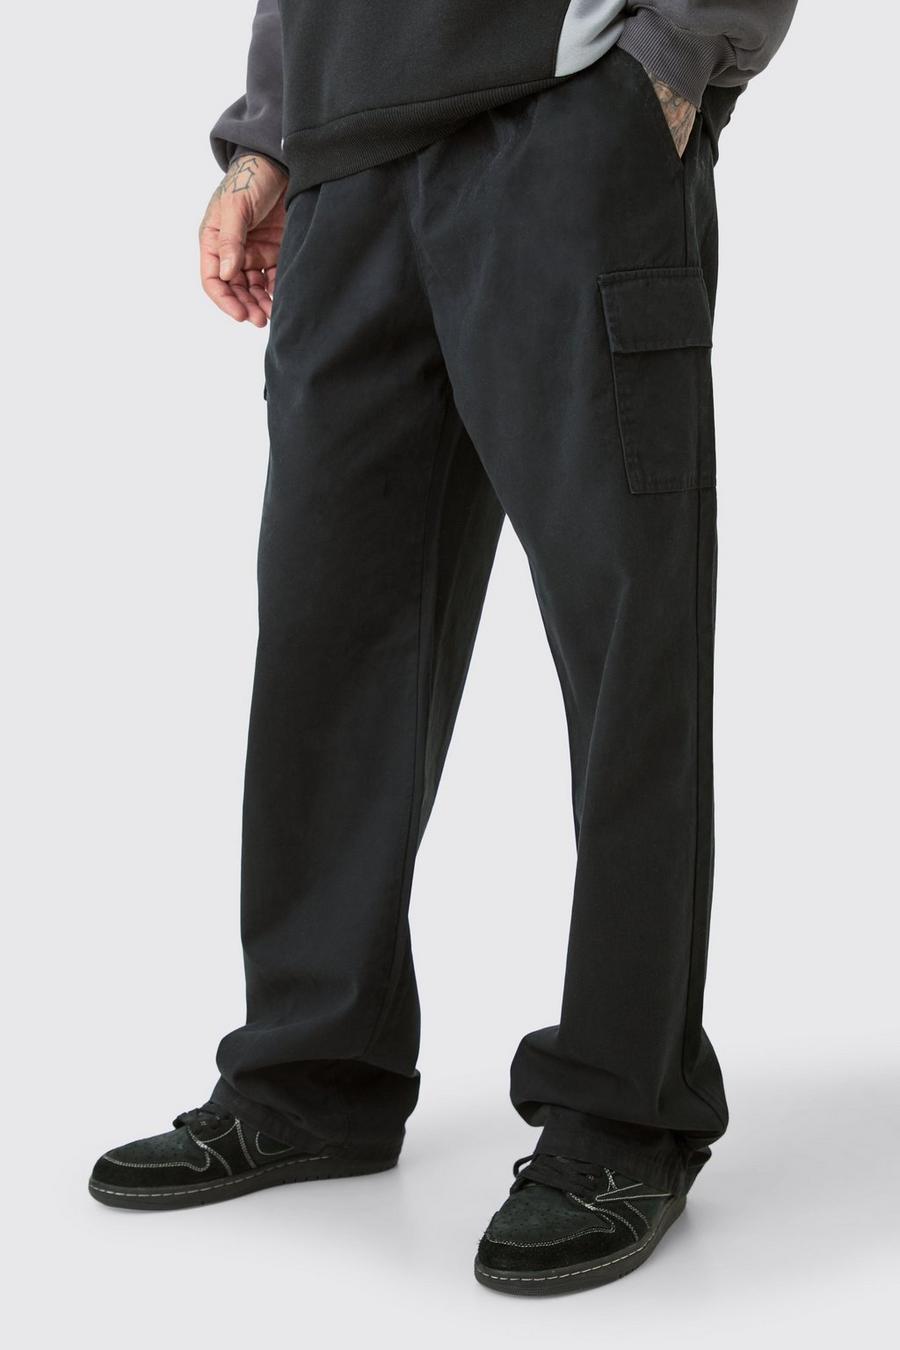 Black Tall Elastic Waist Twill Relaxed Fit Cargo Trouser